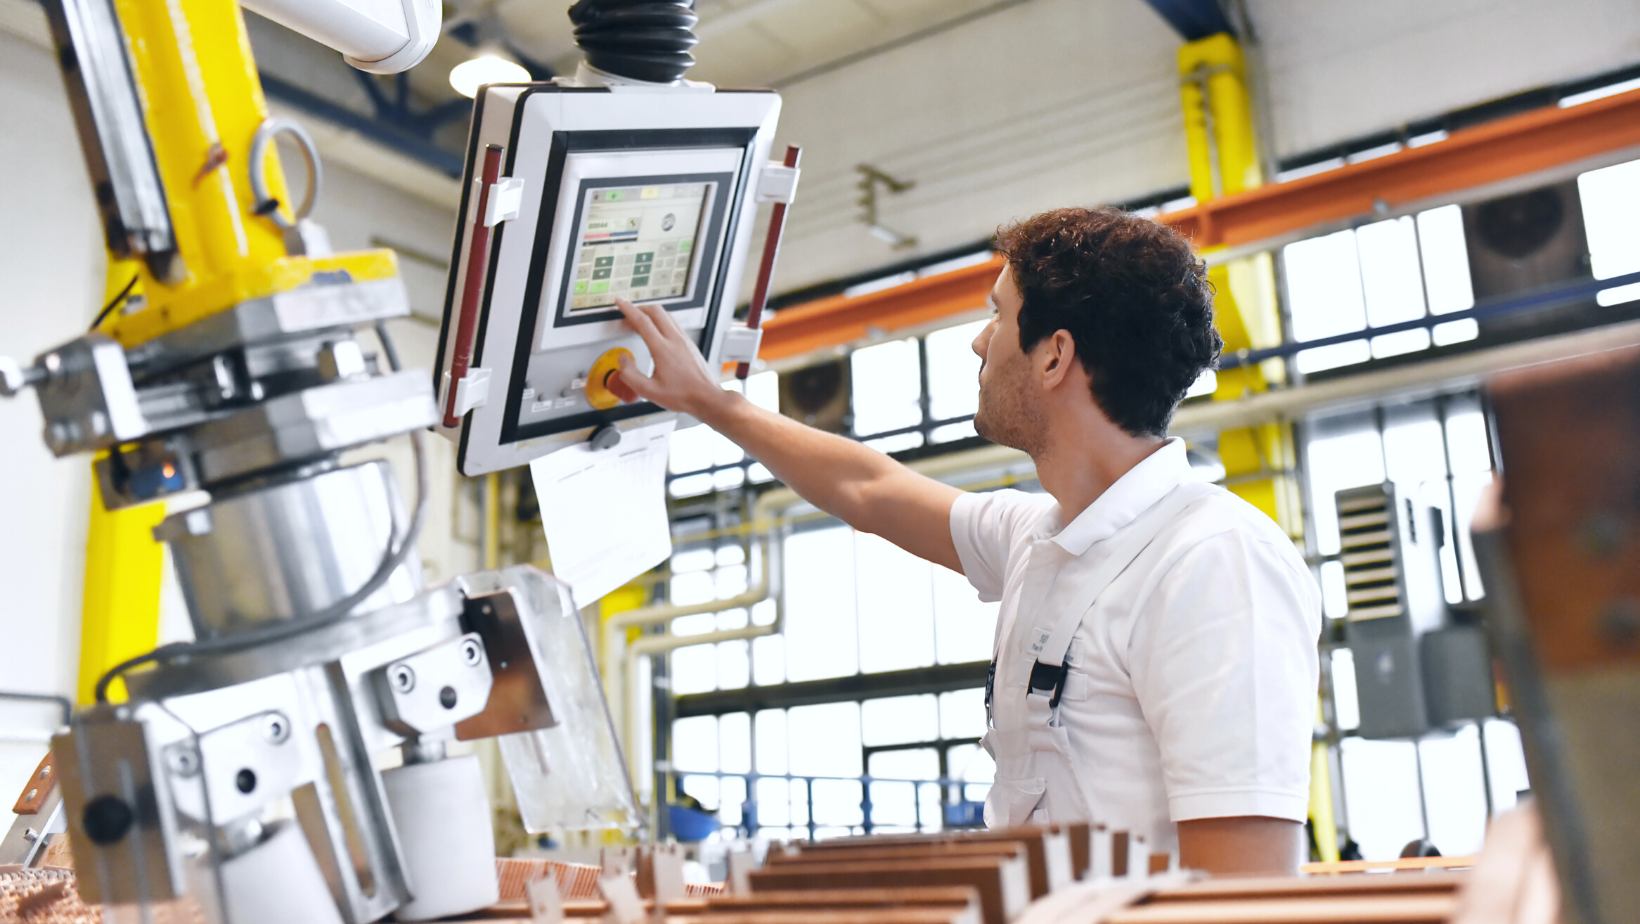 How can simple automation aid manufacturing operators?